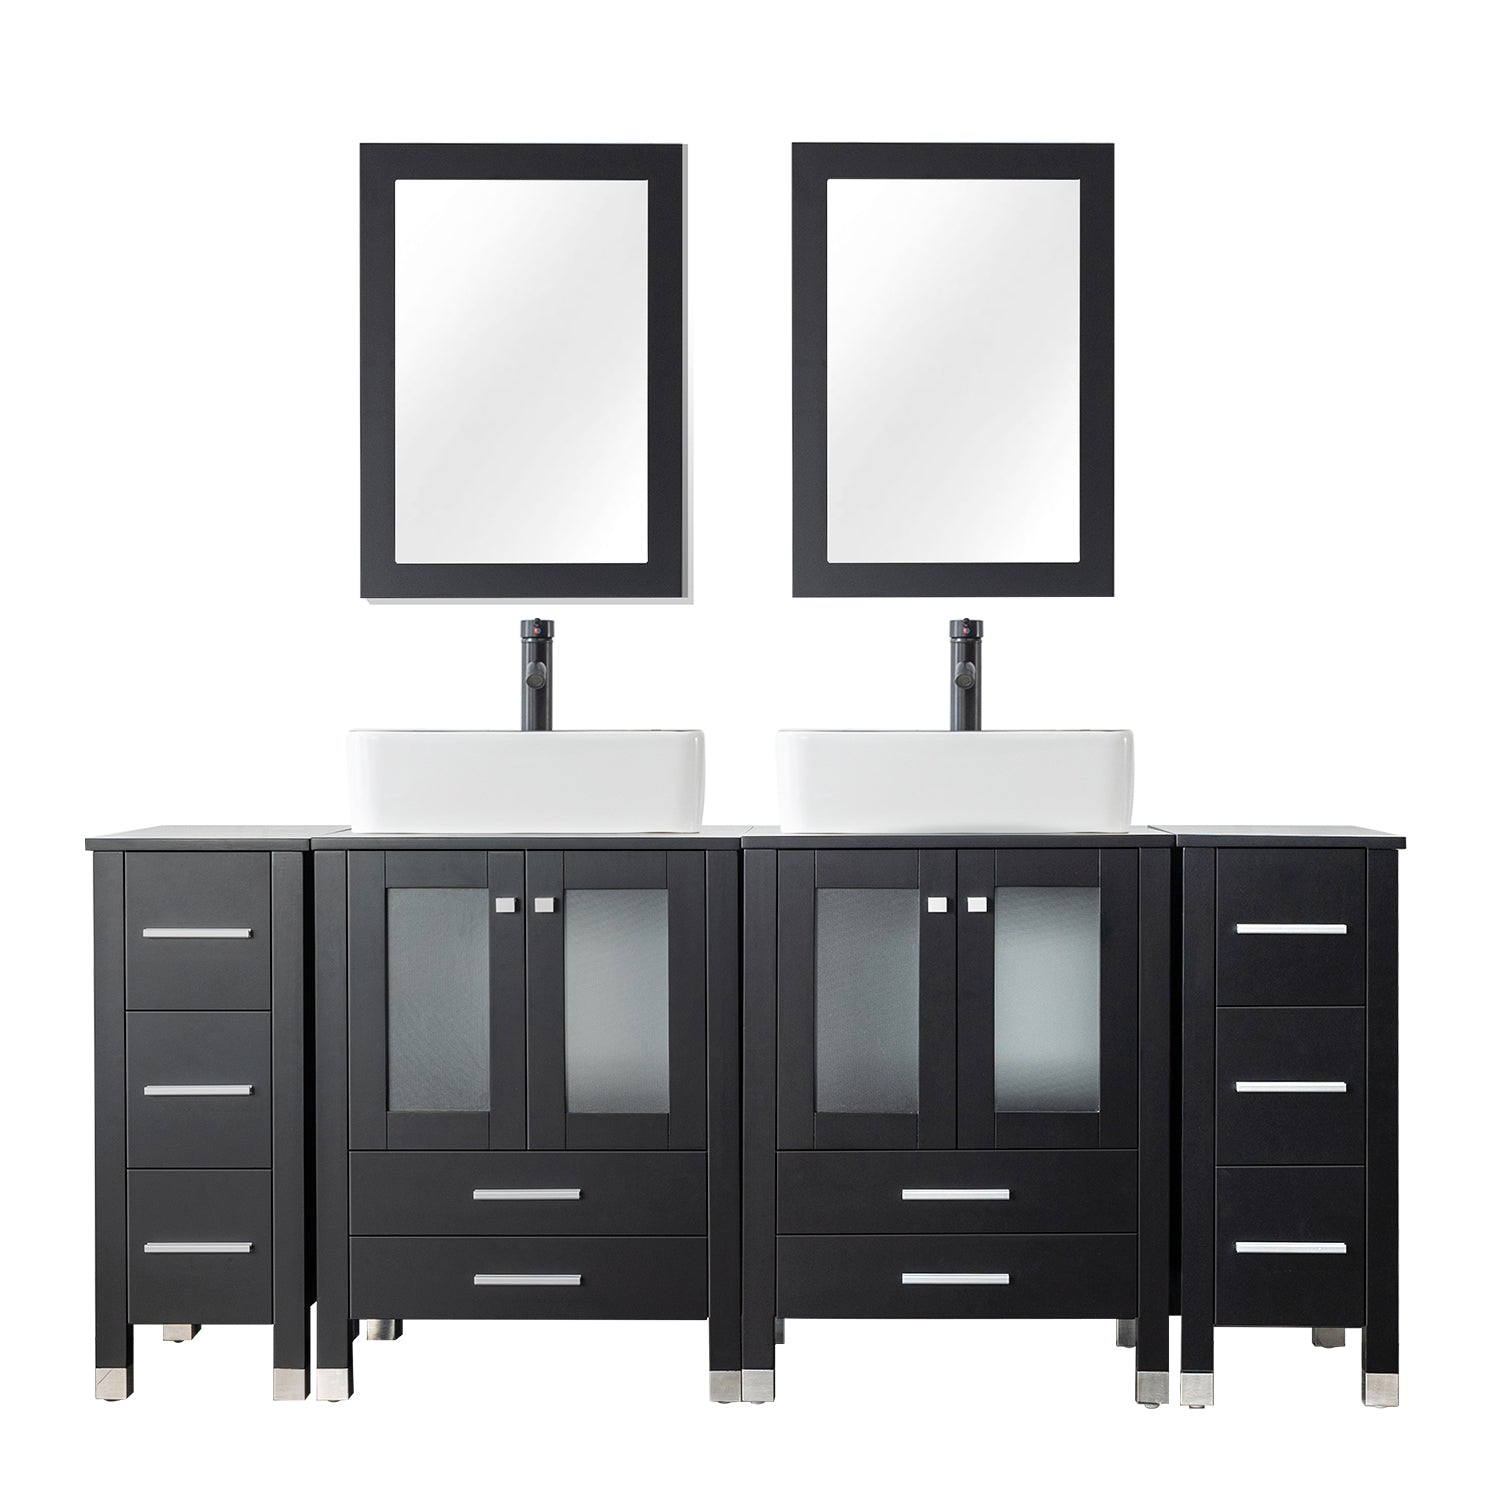 Eclife 72" Double Bathroom Vanity Sink Combos, Solid Wood Construction and Painted Frame - Black